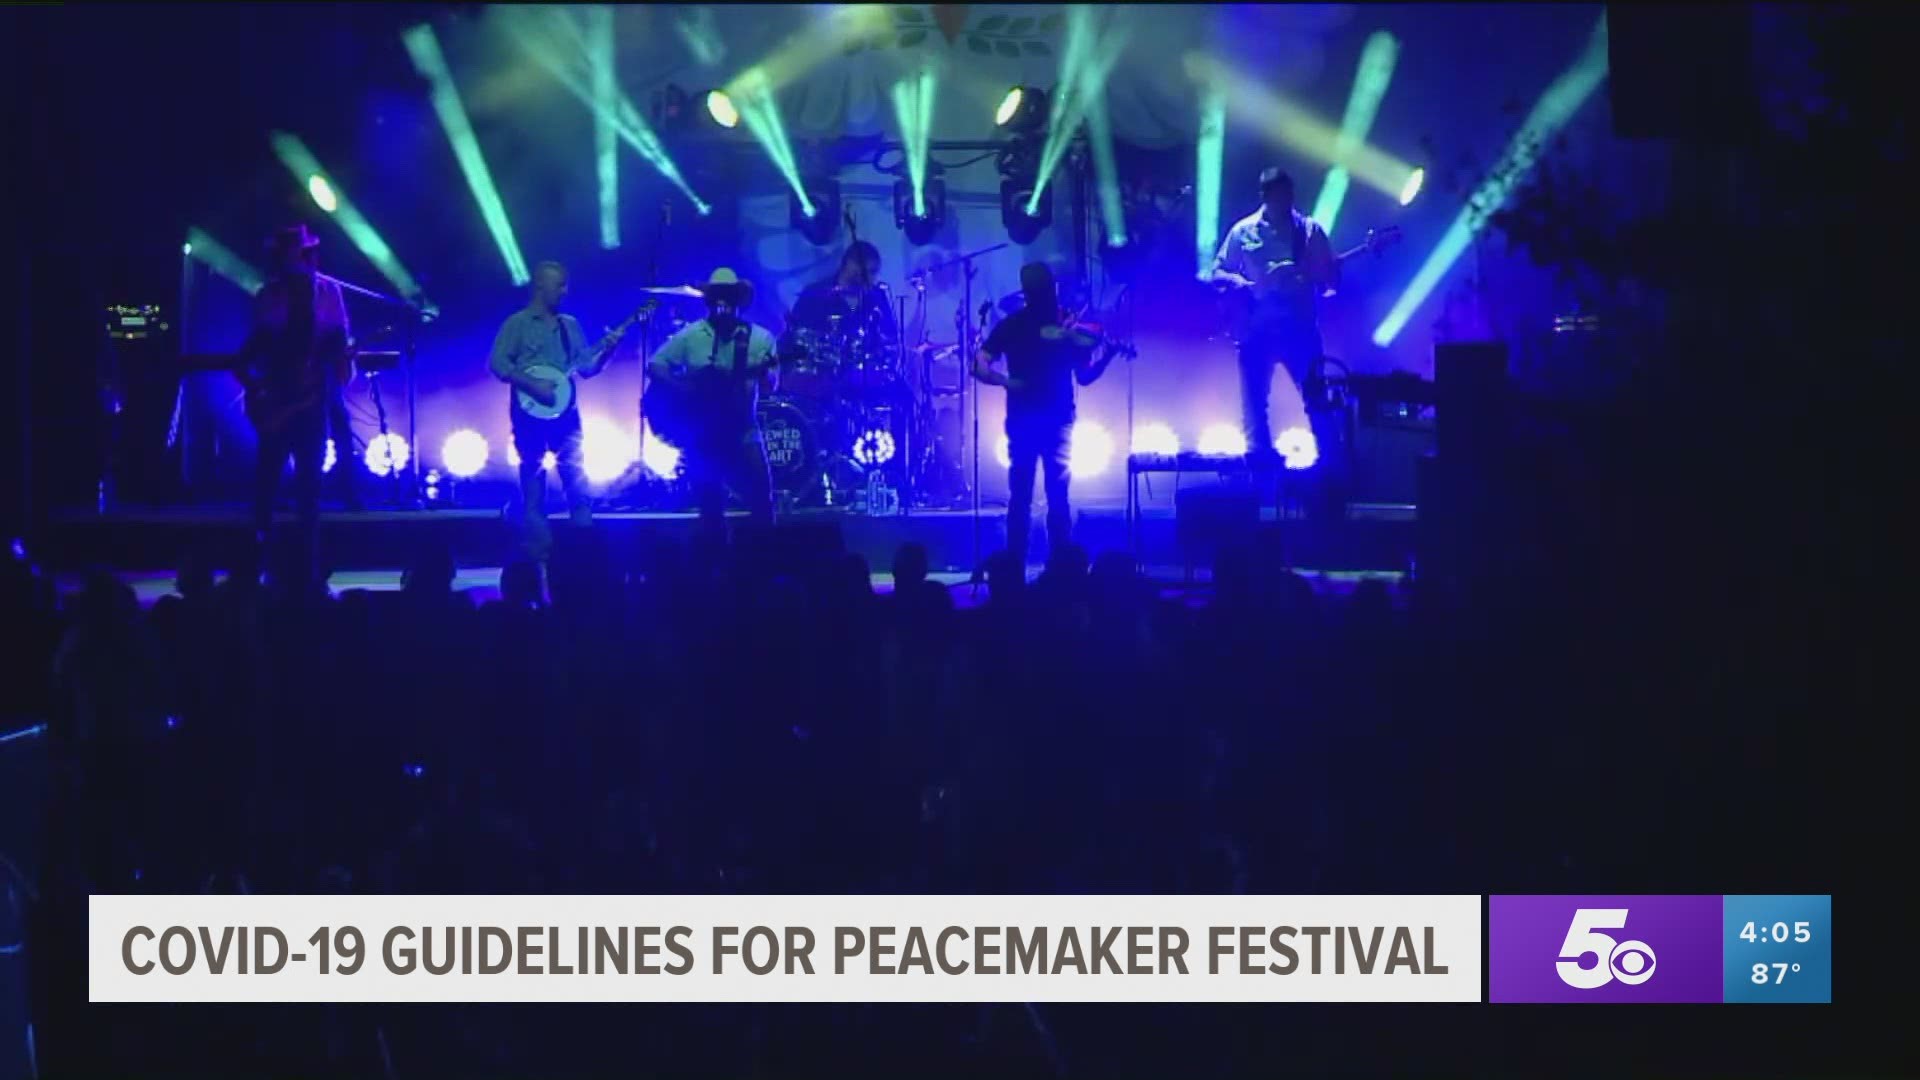 COVID-19 guidelines for Peacemaker Festival